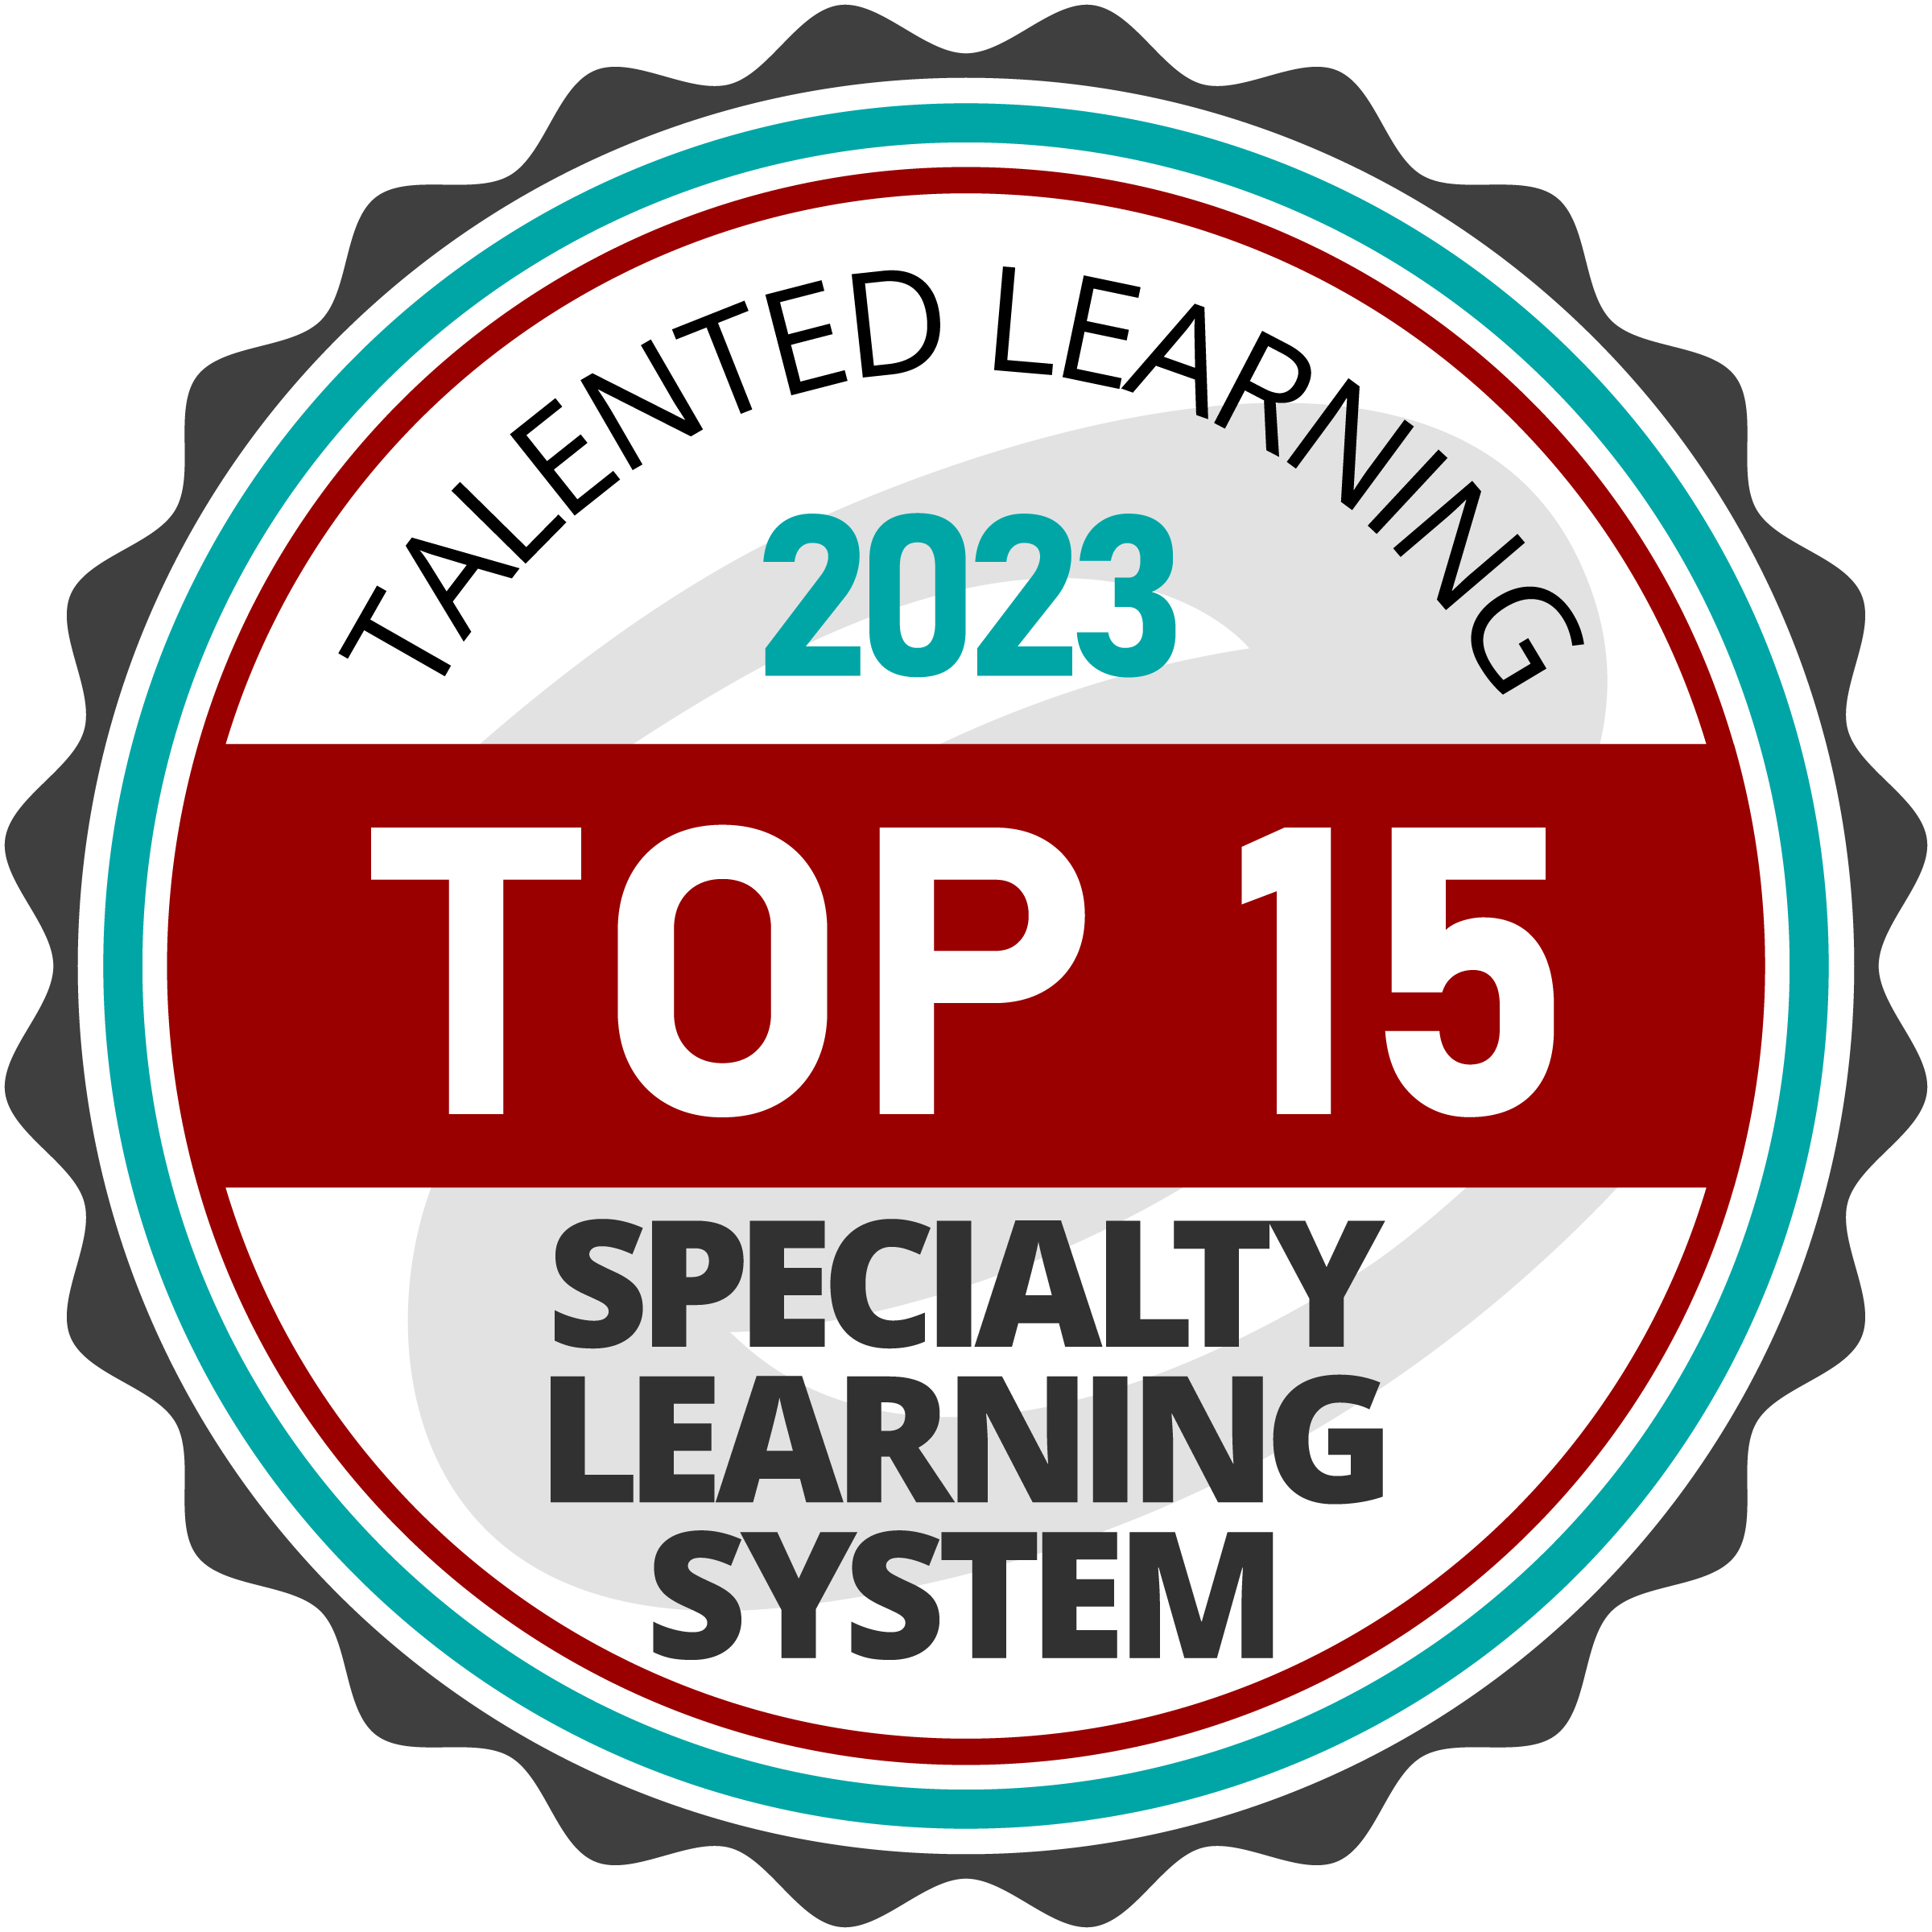 Top 15 Specialty Learning System Award Badge from Talented Learning